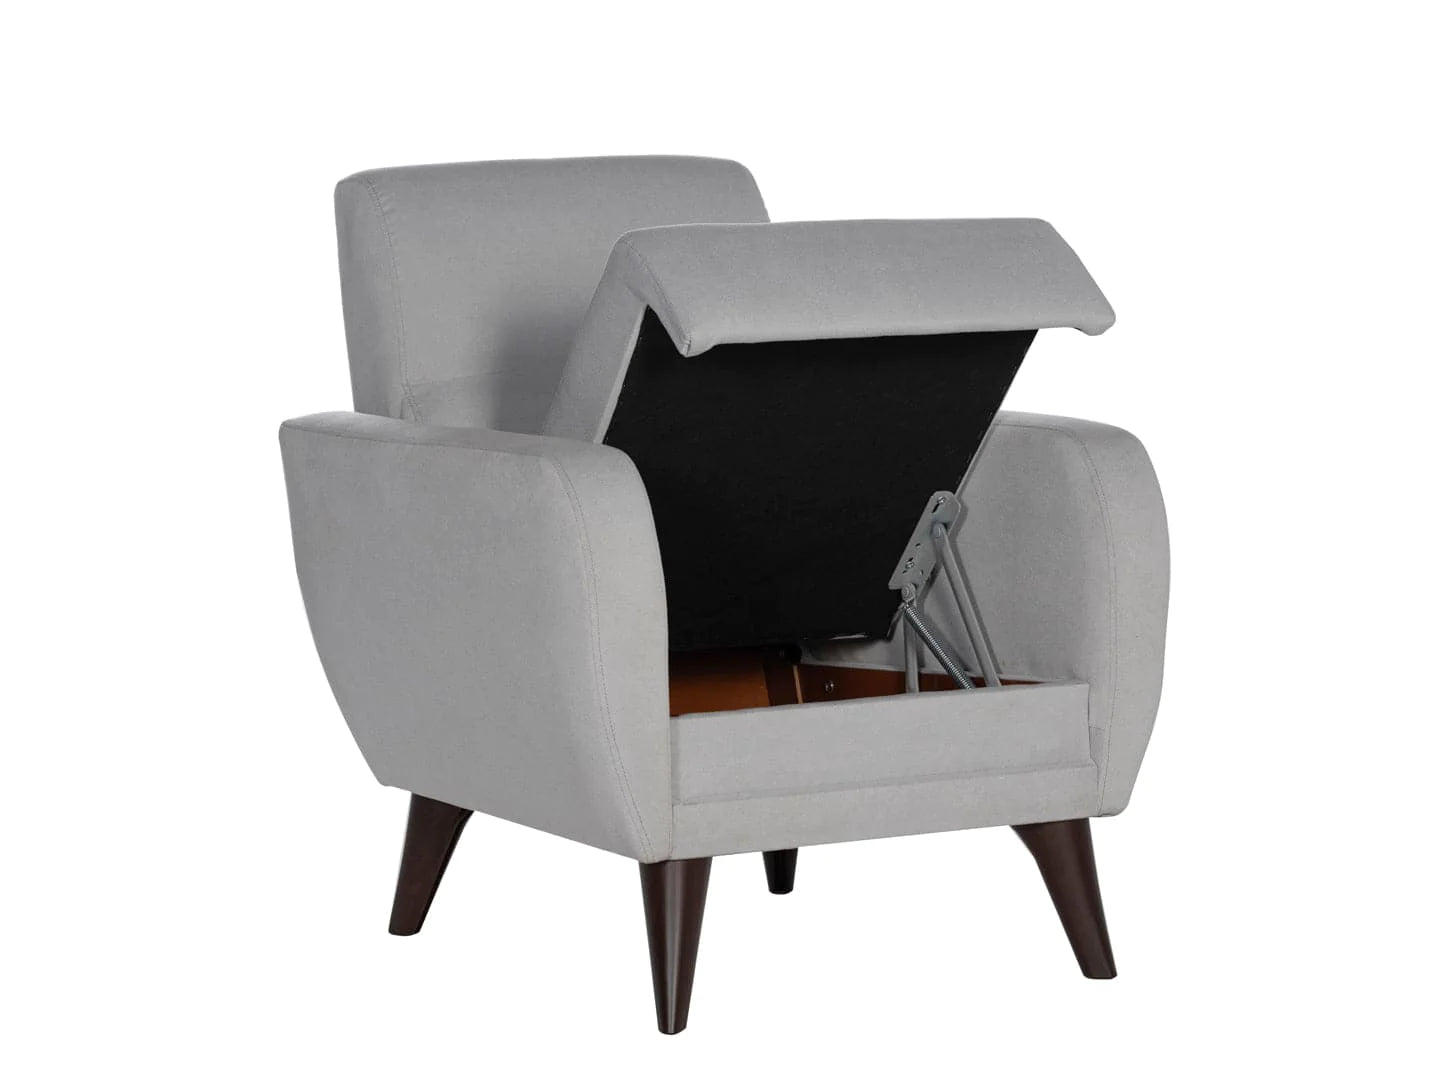 Flexy Chair in a Box W/Storage - Home Store Furniture